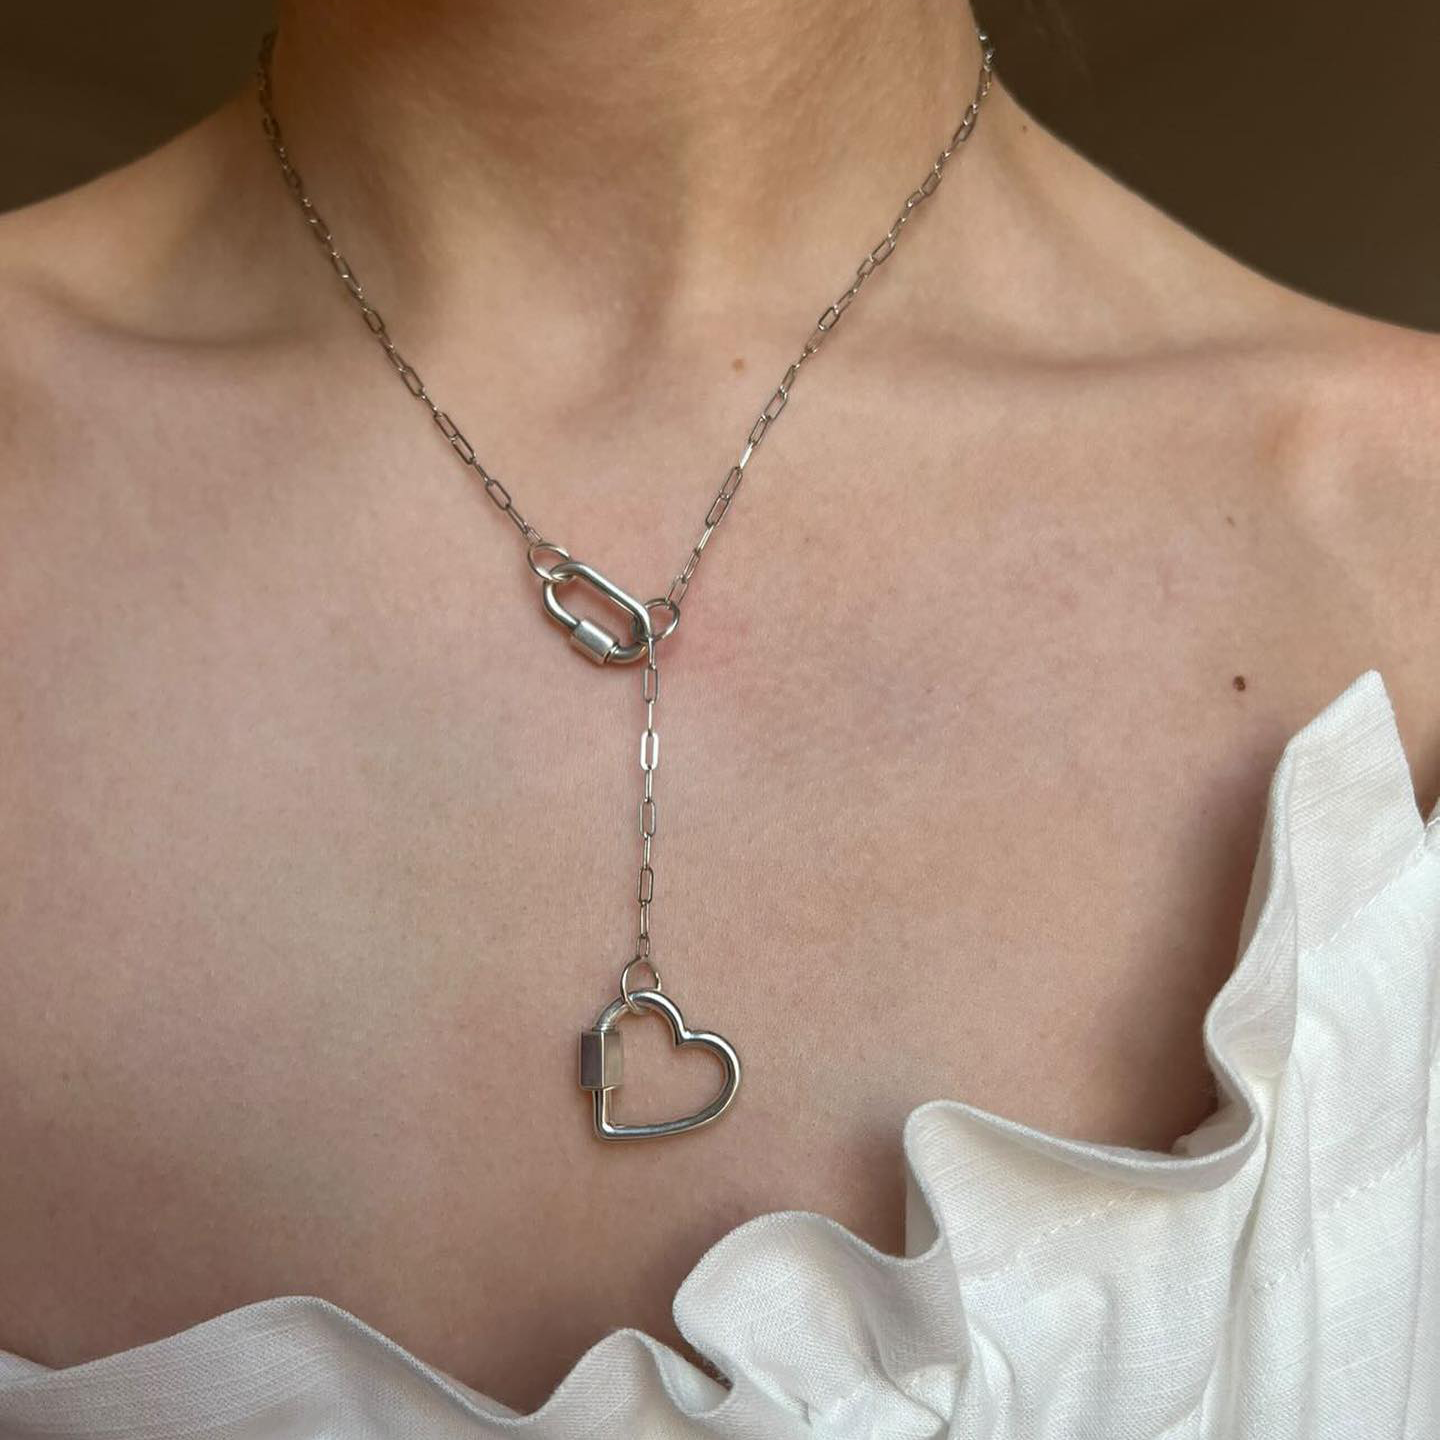 Close up of woman's decolletage wearing small silver lock necklace